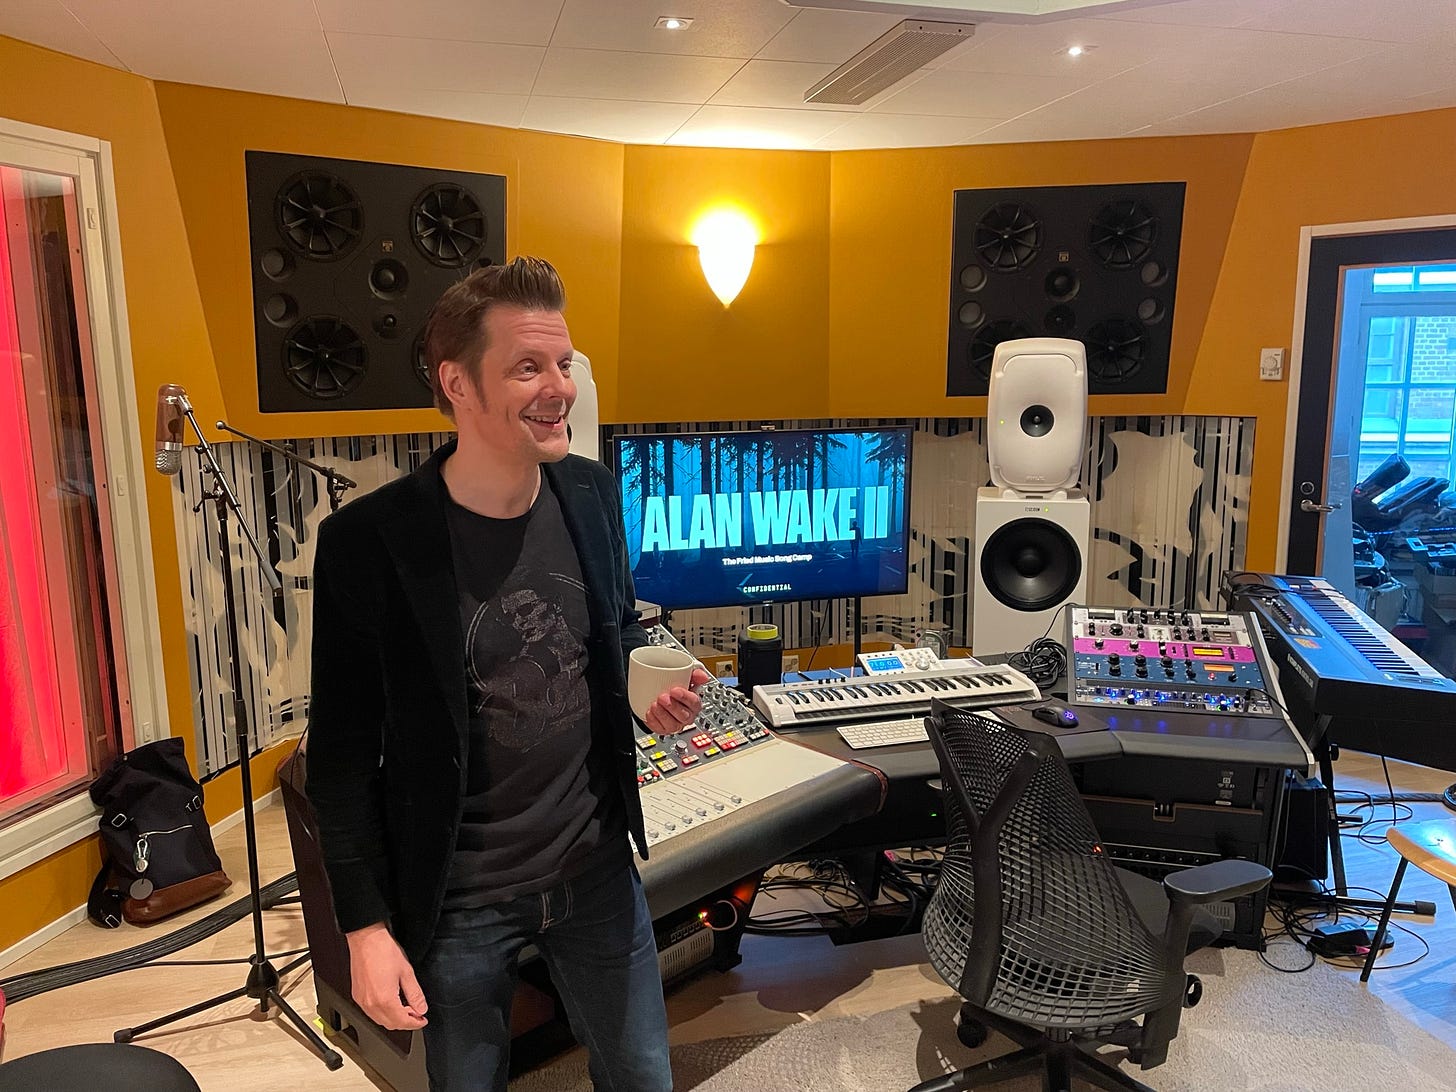 Remedy Entertainment Creative Director Sam Lake in a recording studio for Alan Wake 2: Chapter Songs